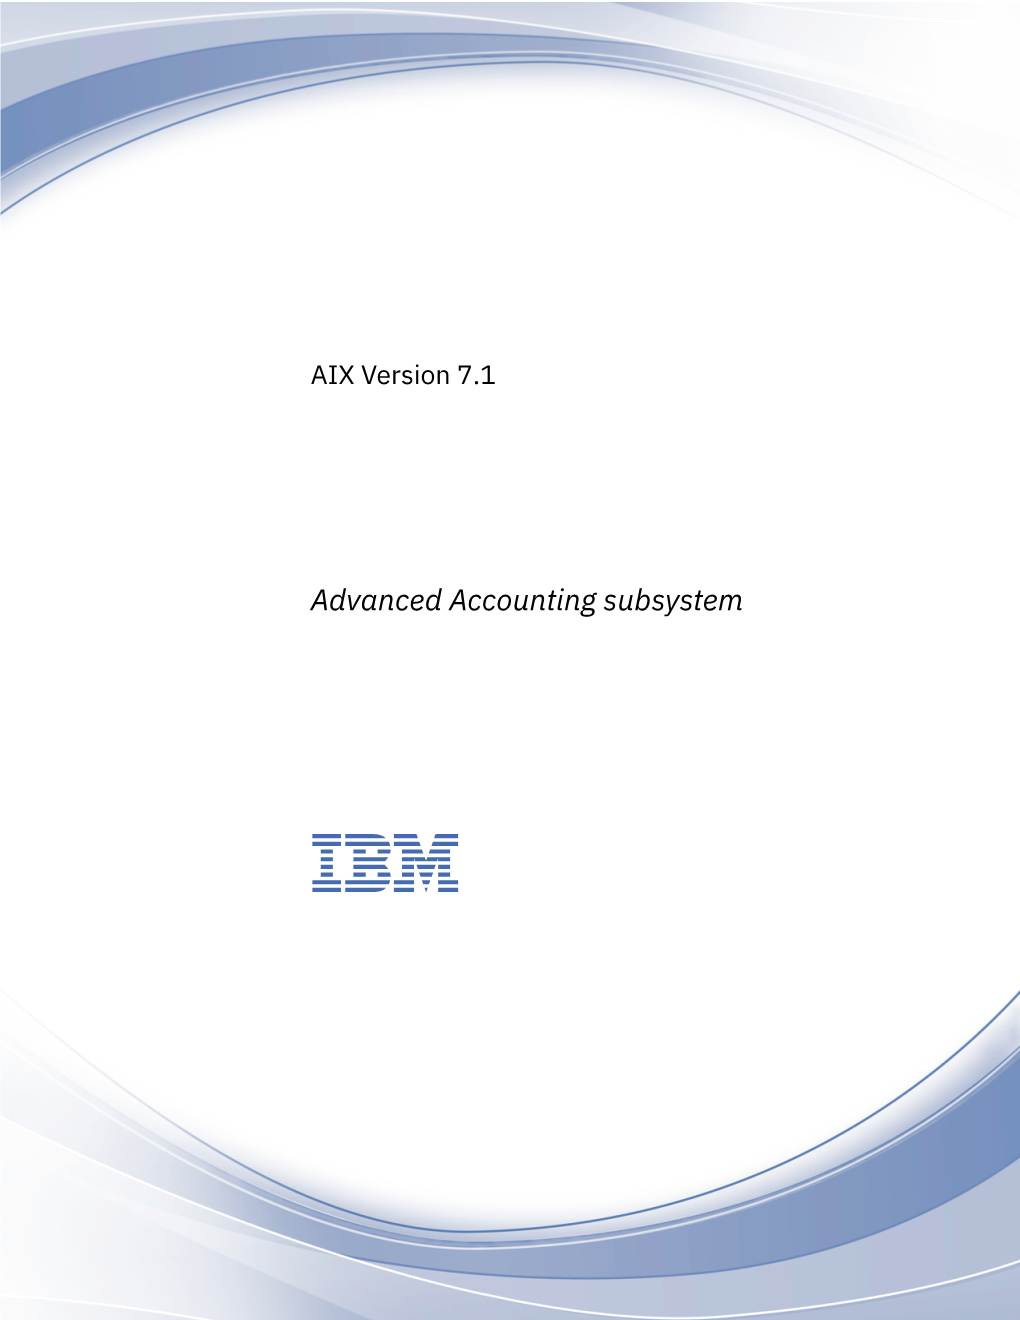 Advanced Accounting Subsystem